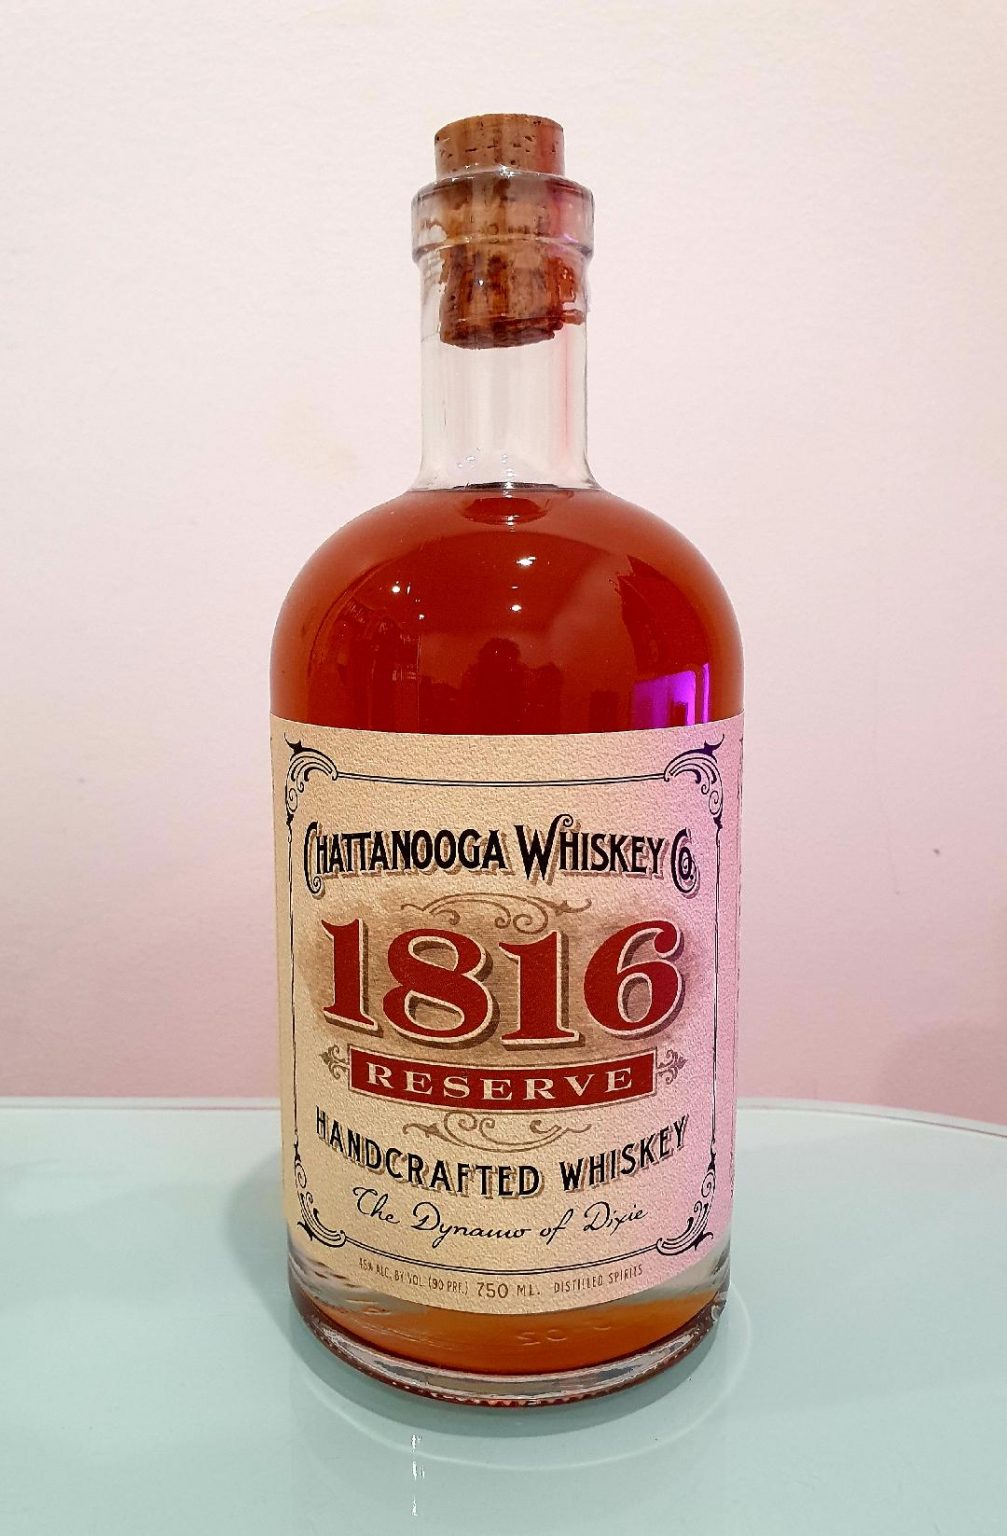 Chattanooga Whisky Co. 1816 Reserve Whiskey 750ml @ 45% ...